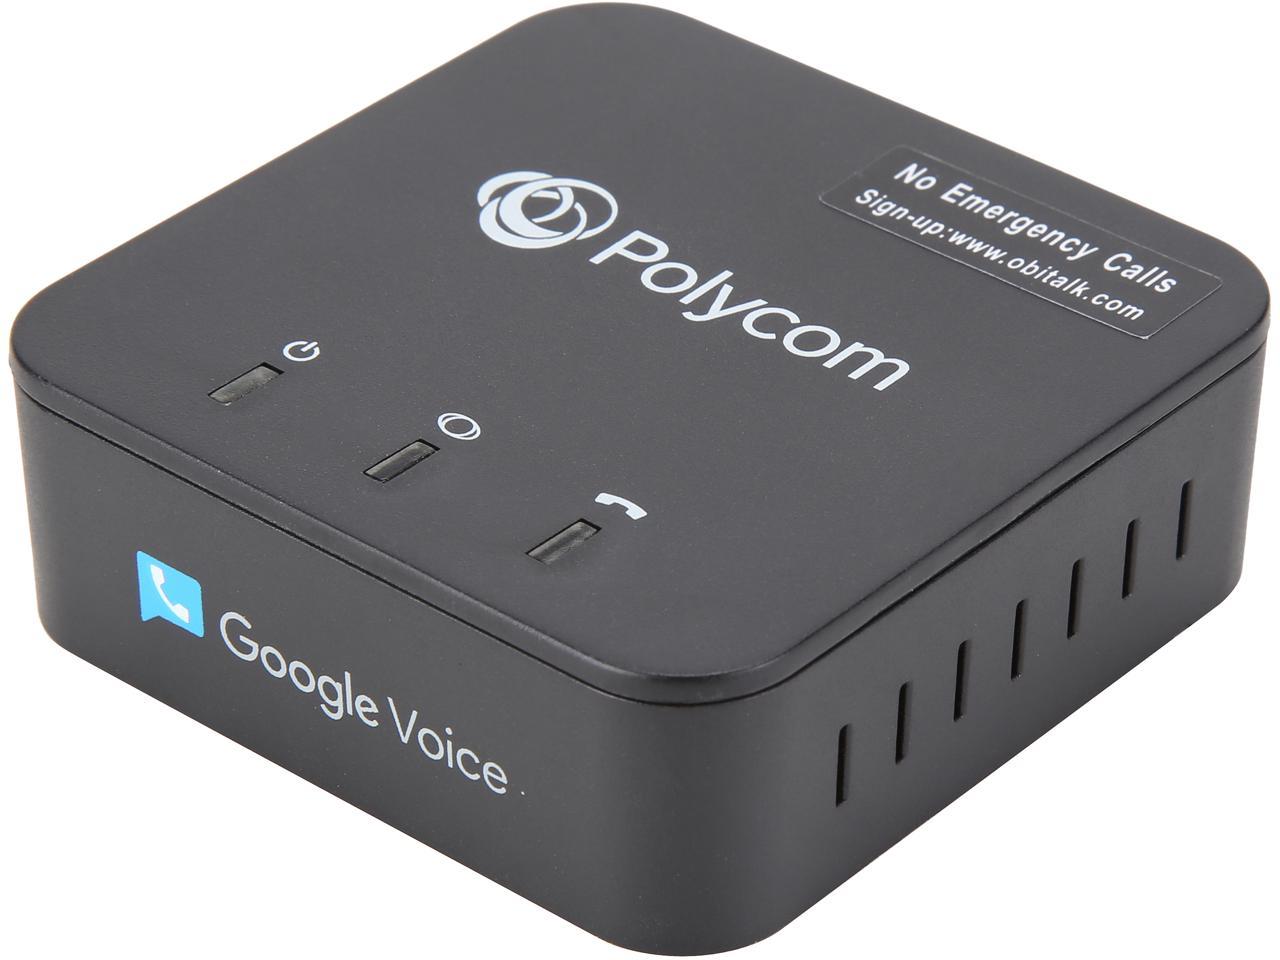 Polycom OBi200 VoIP Telephone Adapter with Google Voice & SIP @Newegg (BF ad) $37